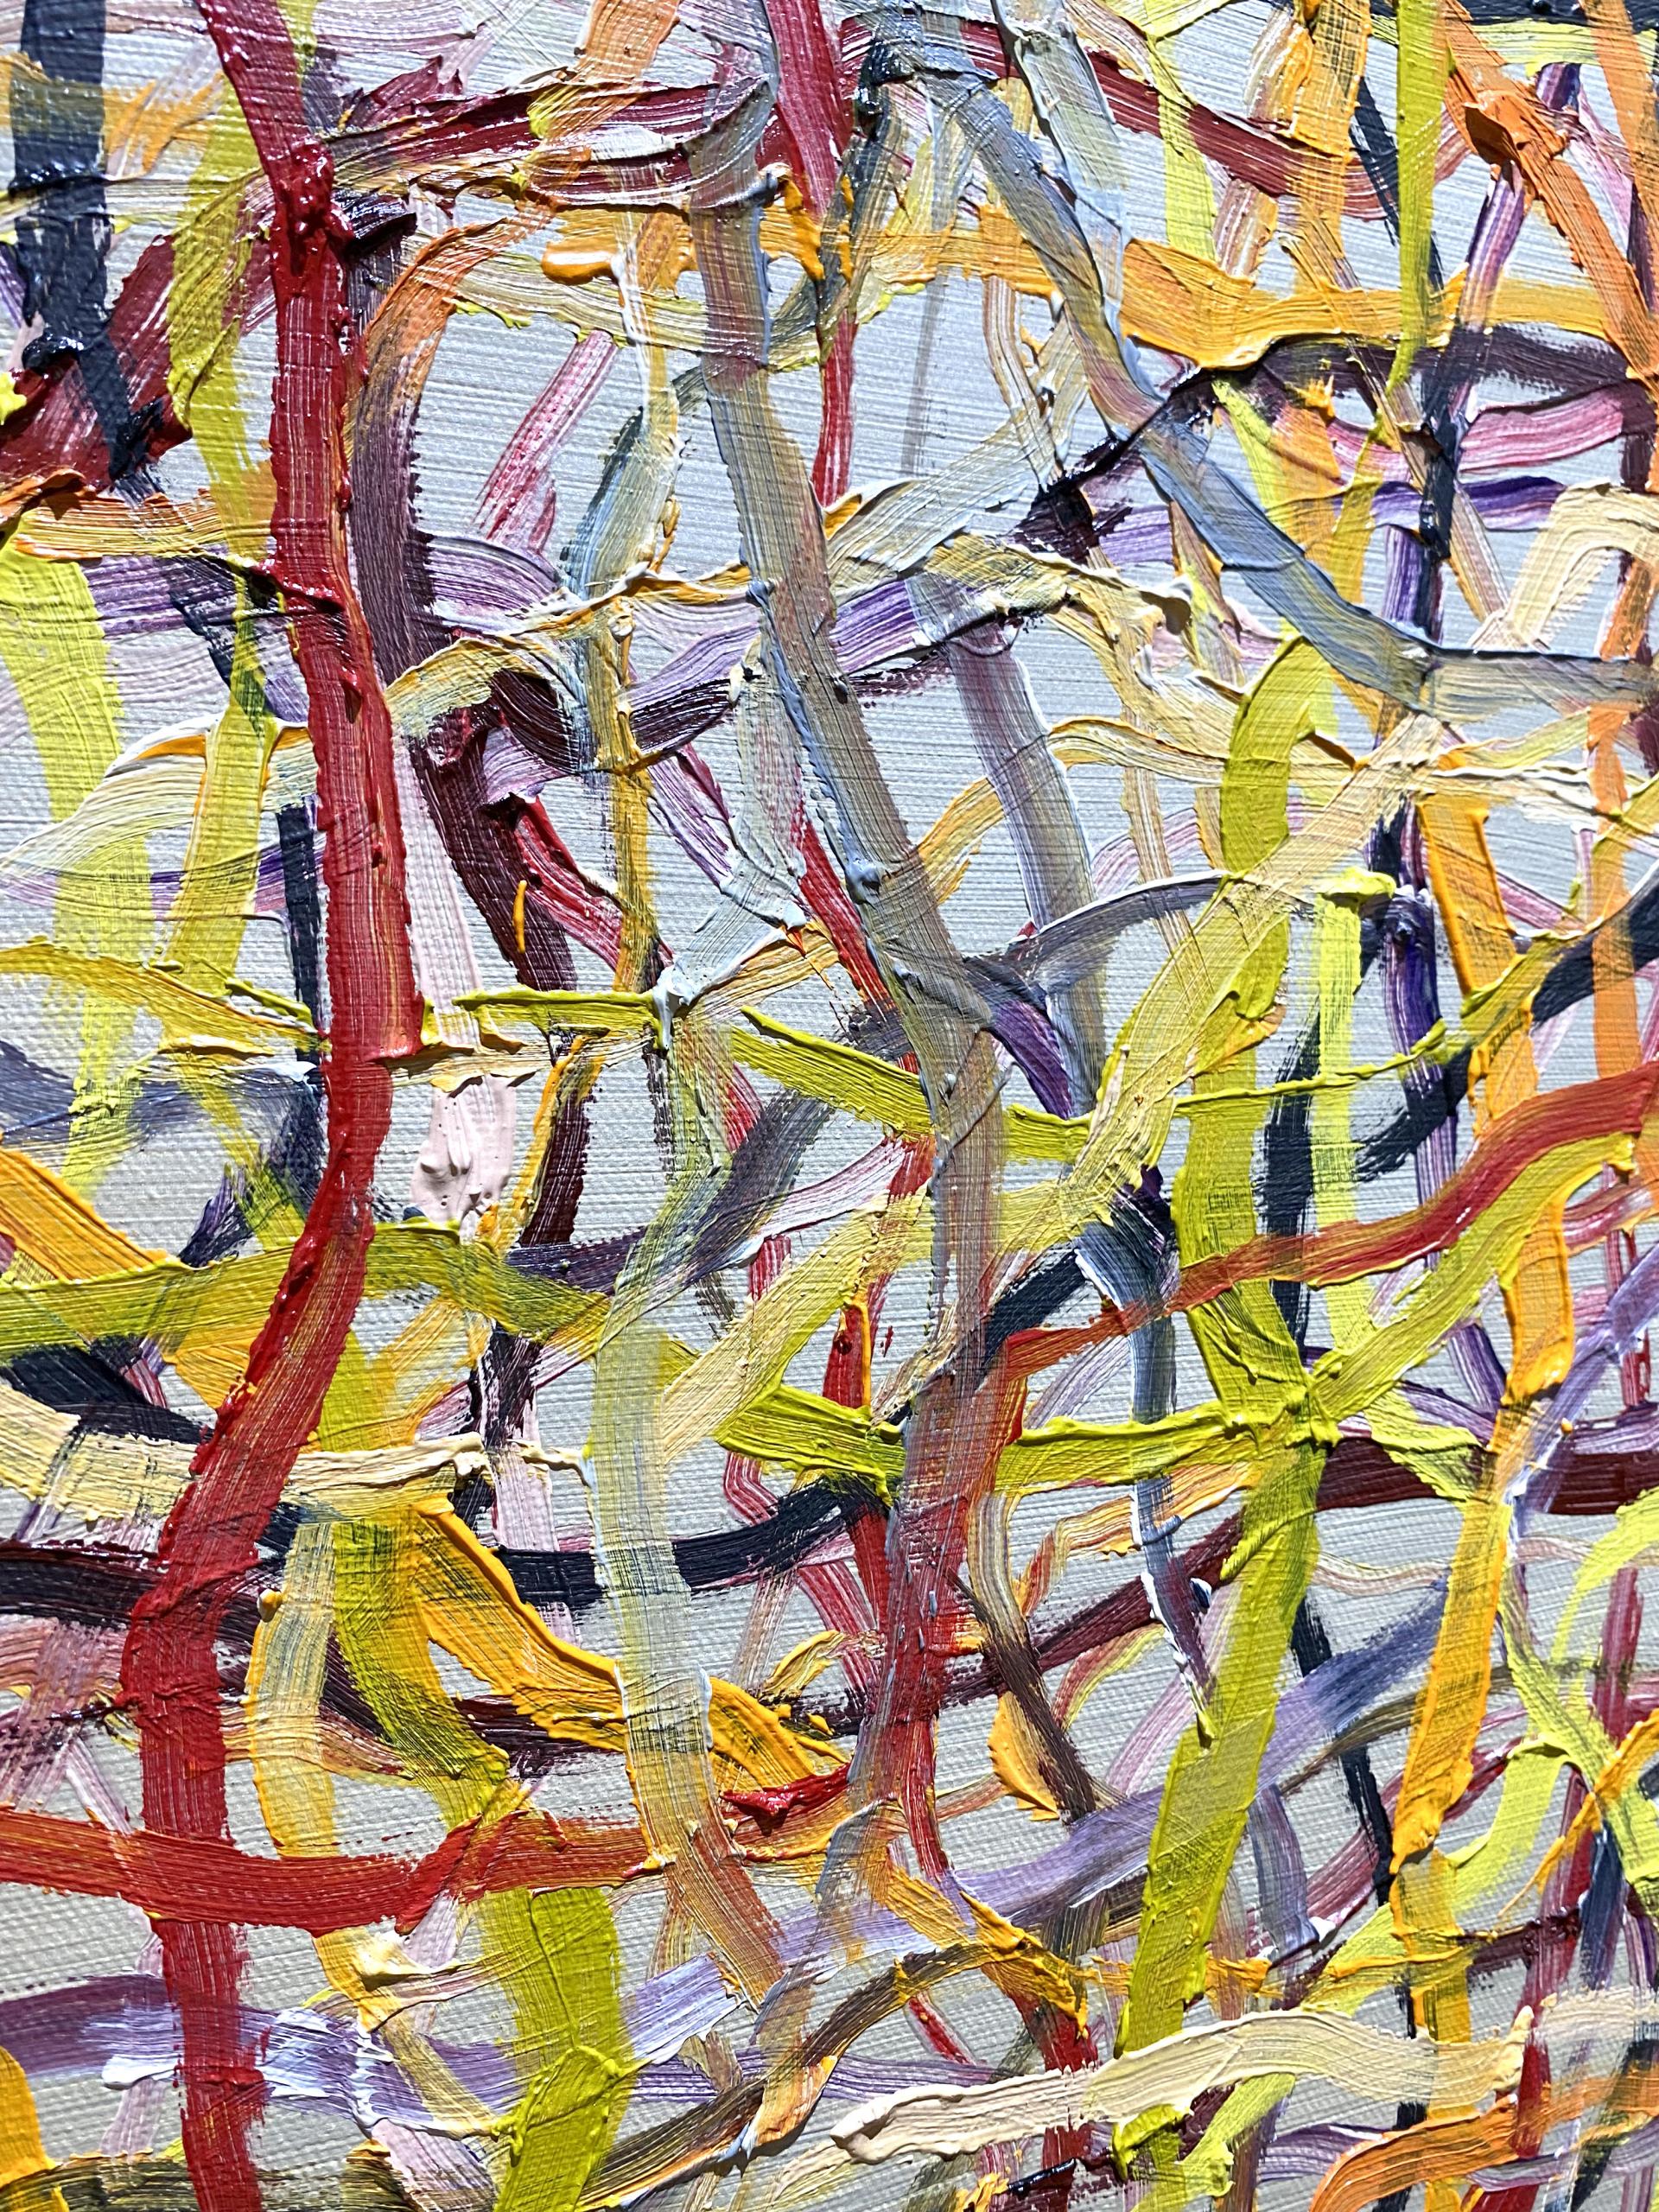 The image shows an abstract painting. The painting features a chaotic mix of colorful lines. The colors include red, yellow, green, blue, purple and cream creating a vibrant and dynamic composition. The brushstrokes overlap, forming a complex web of lines and shapes. The painting has a textured appearance due to the visible brushstrokes and layers of paint.